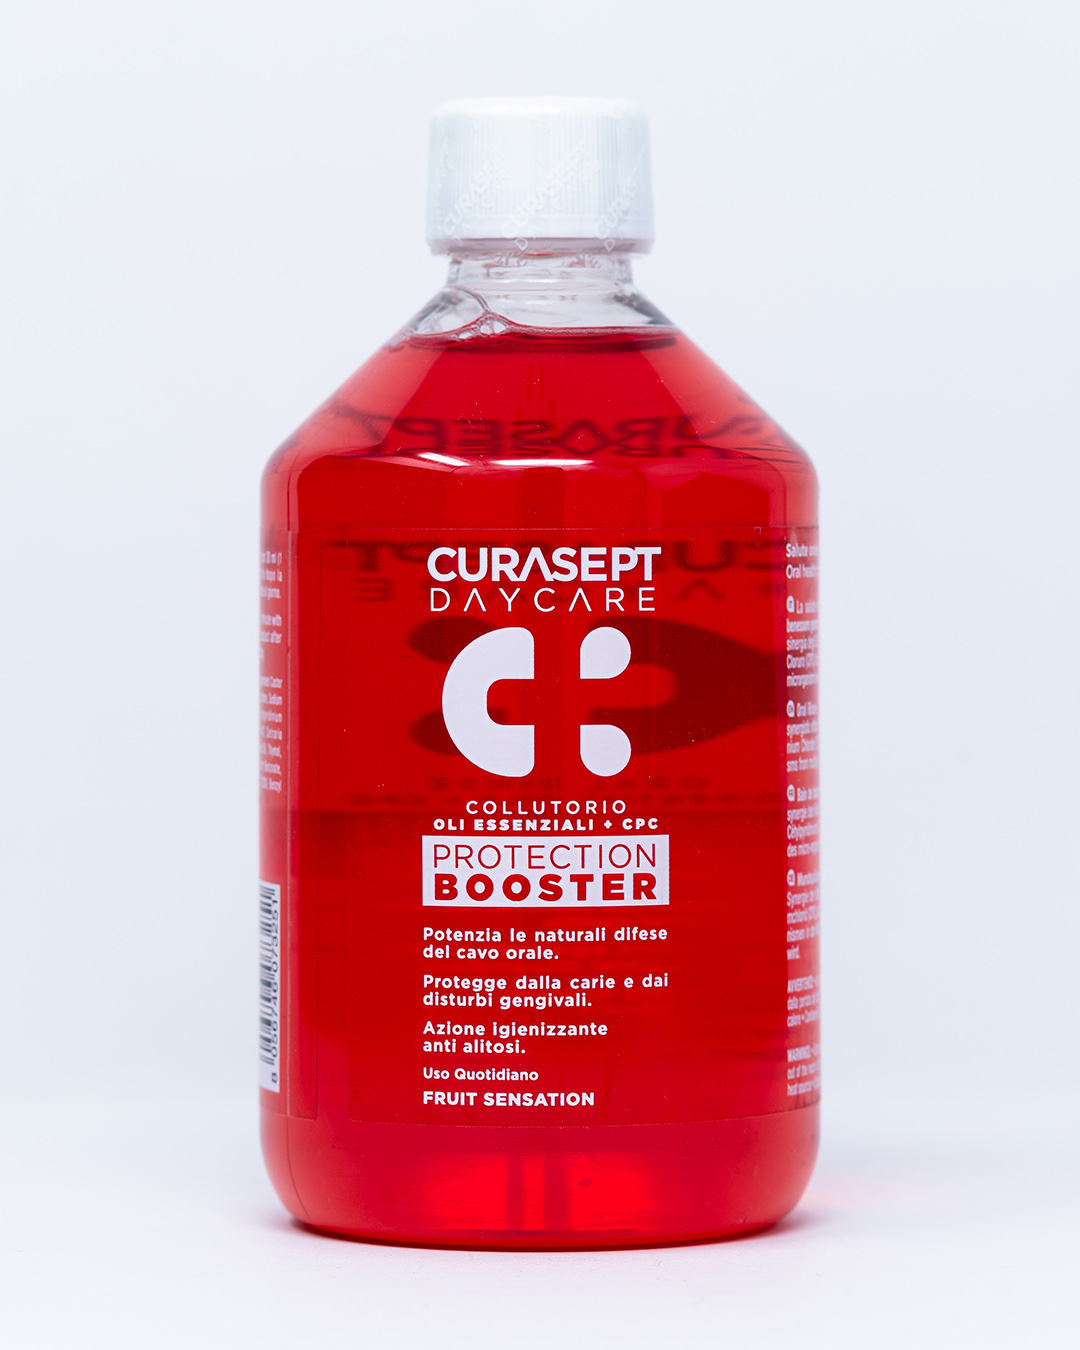 Curasept Collutorio Daycare Protection Booster Fruit Sensation - 500 ml